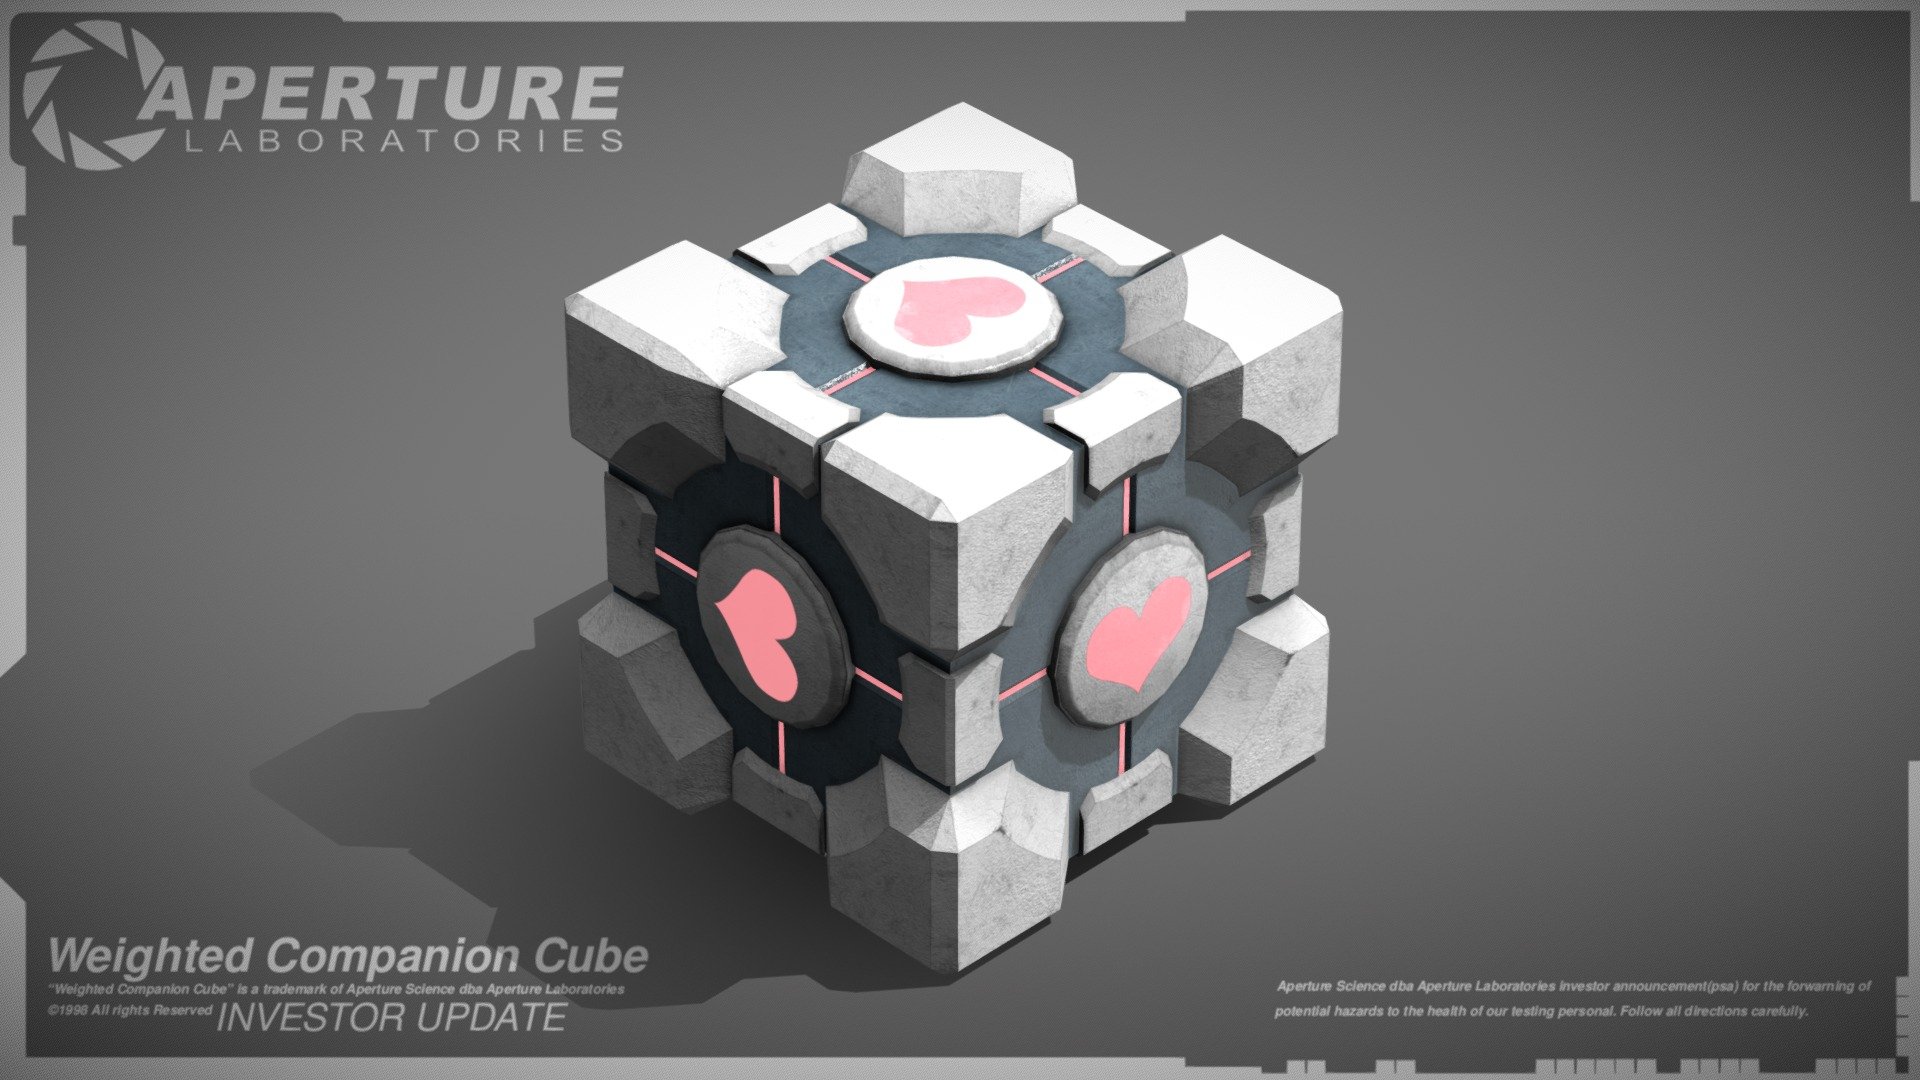 Kirurgi ophøre kalligrafi Weighted Companion Cube (Portal) - 3D model by Angel Cormier  (@angelcormier) [875ad1b]